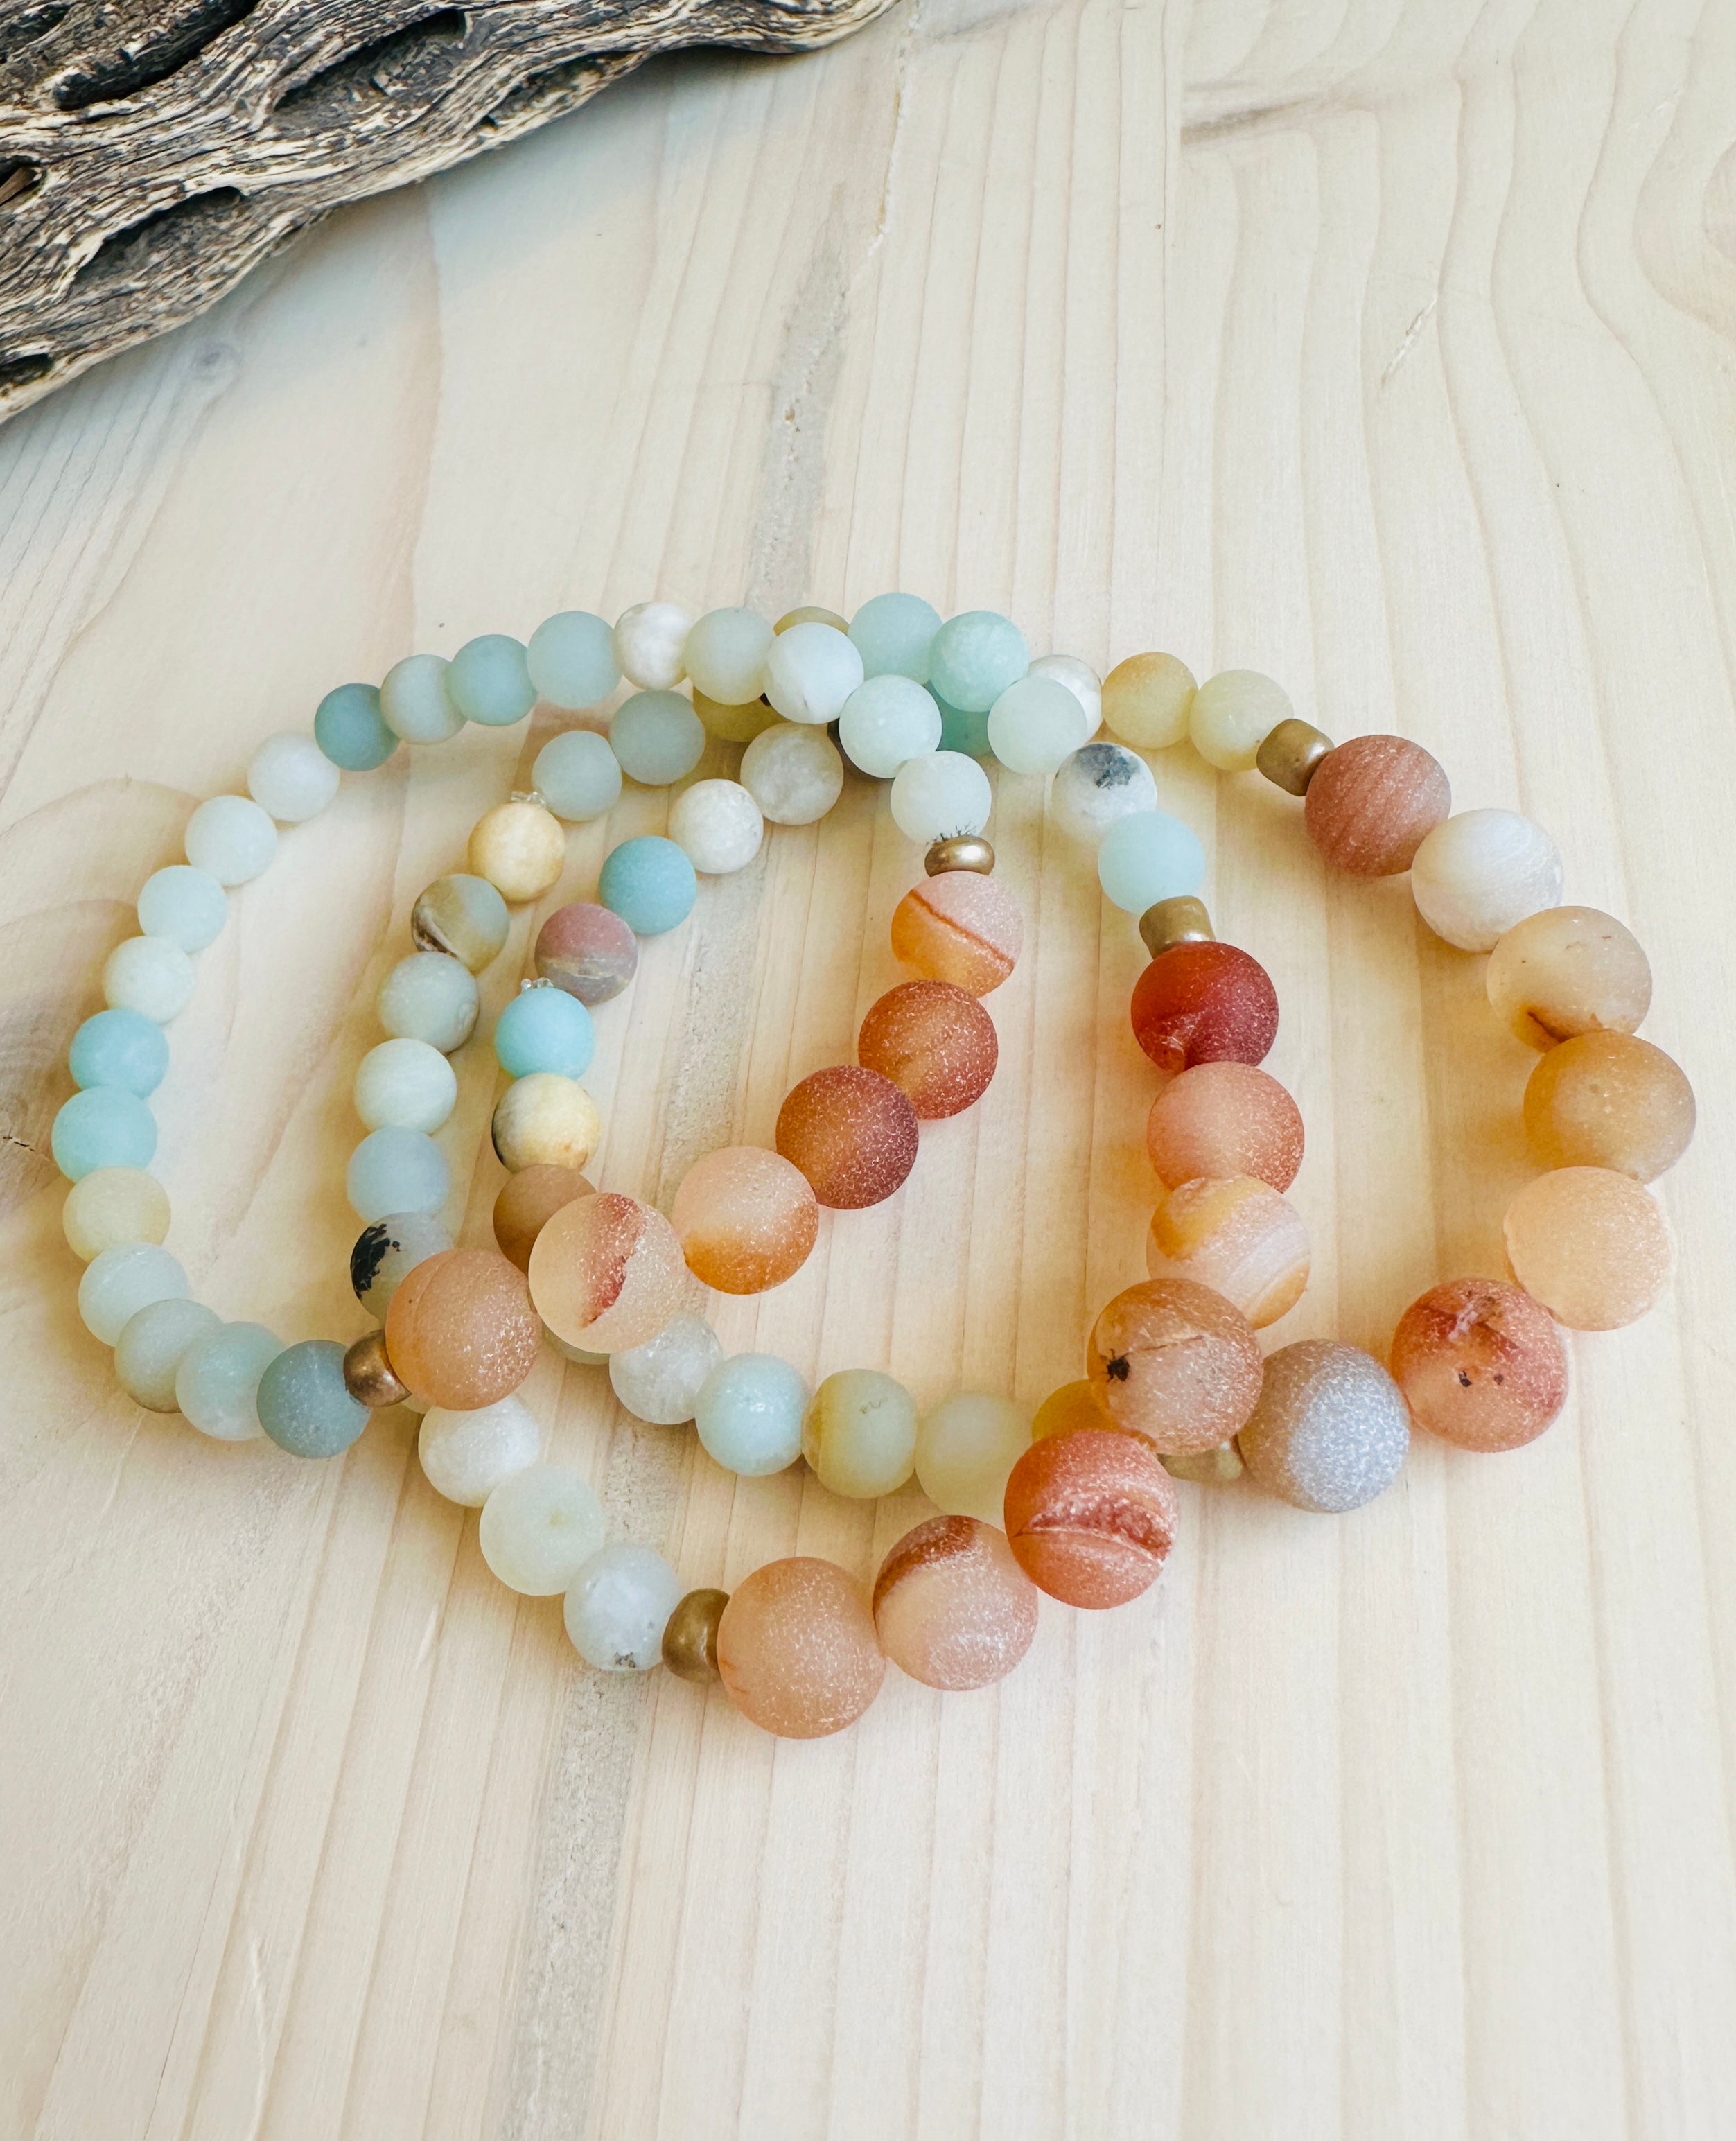 Ocean Stones” – Natural stone bracelets for a unique style! – Corano Jewelry